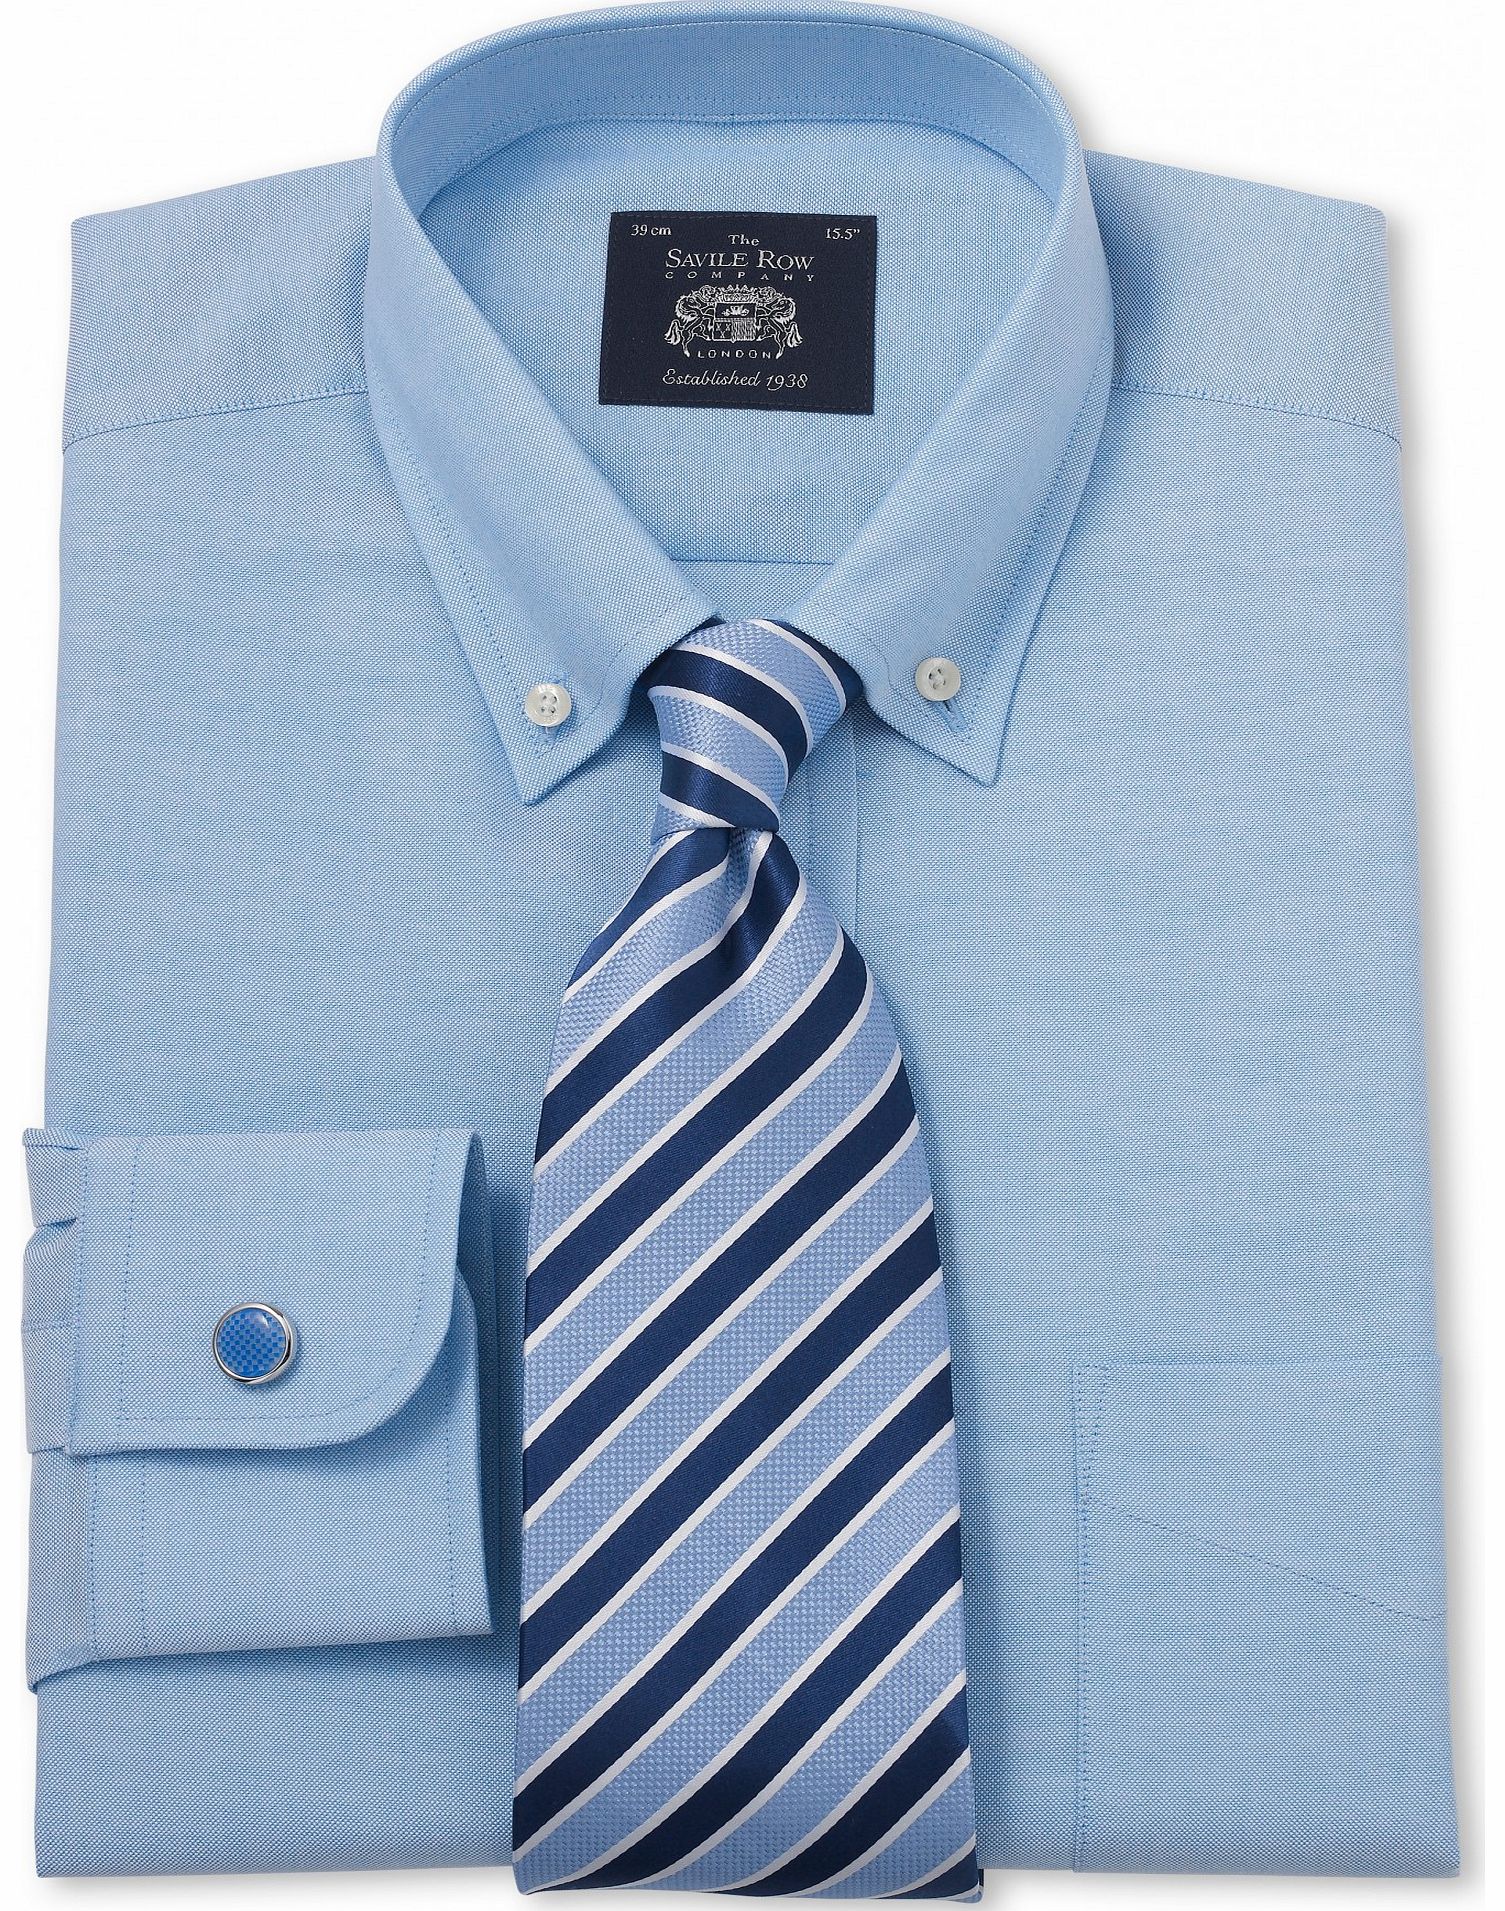 Savile Row Company Blue Pinpoint Classic Fit Shirt 17 1/2``